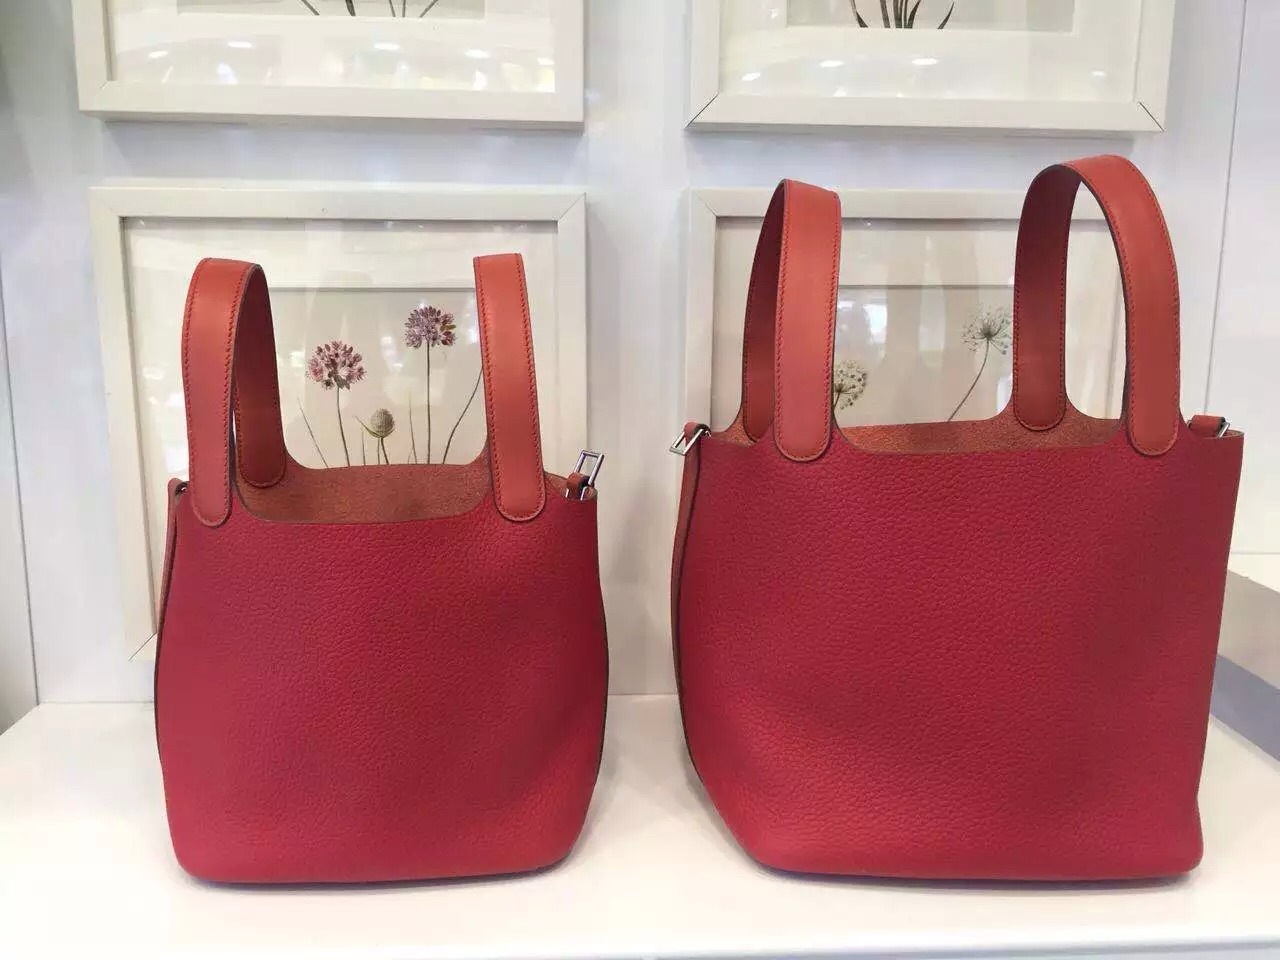 Discount Hermes Togo Leather&#038; Swift Leather Q5 Chinese Red Picotin Lock Tote Bag Two Size